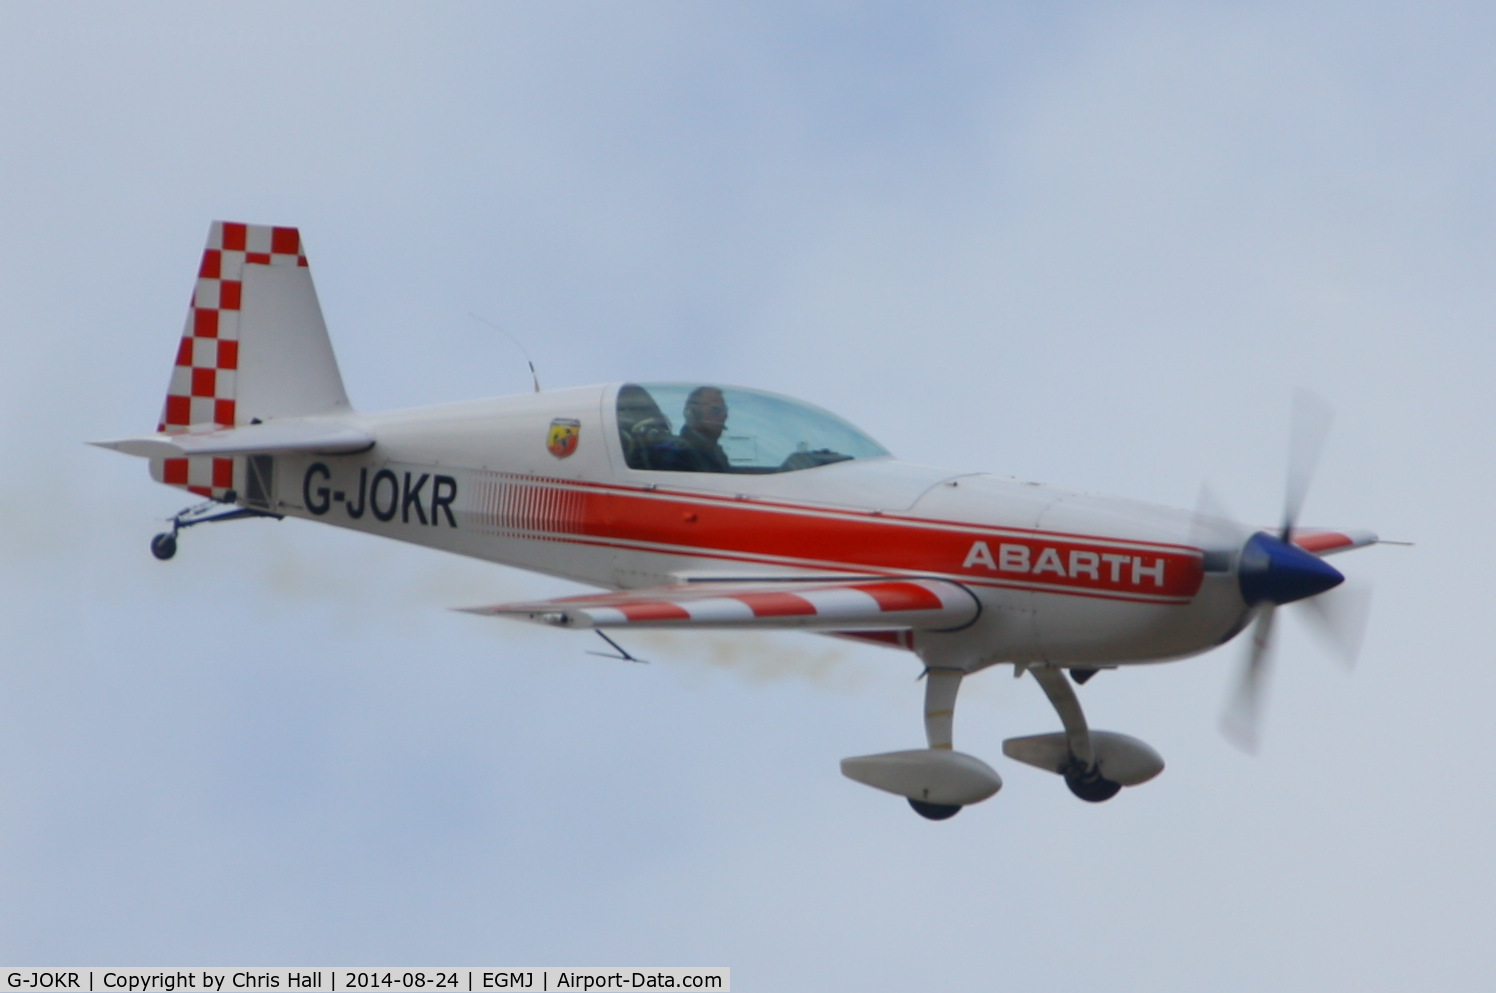 G-JOKR, 2008 Extra EA-300L C/N 1278, at the Little Gransden Airshow 2014